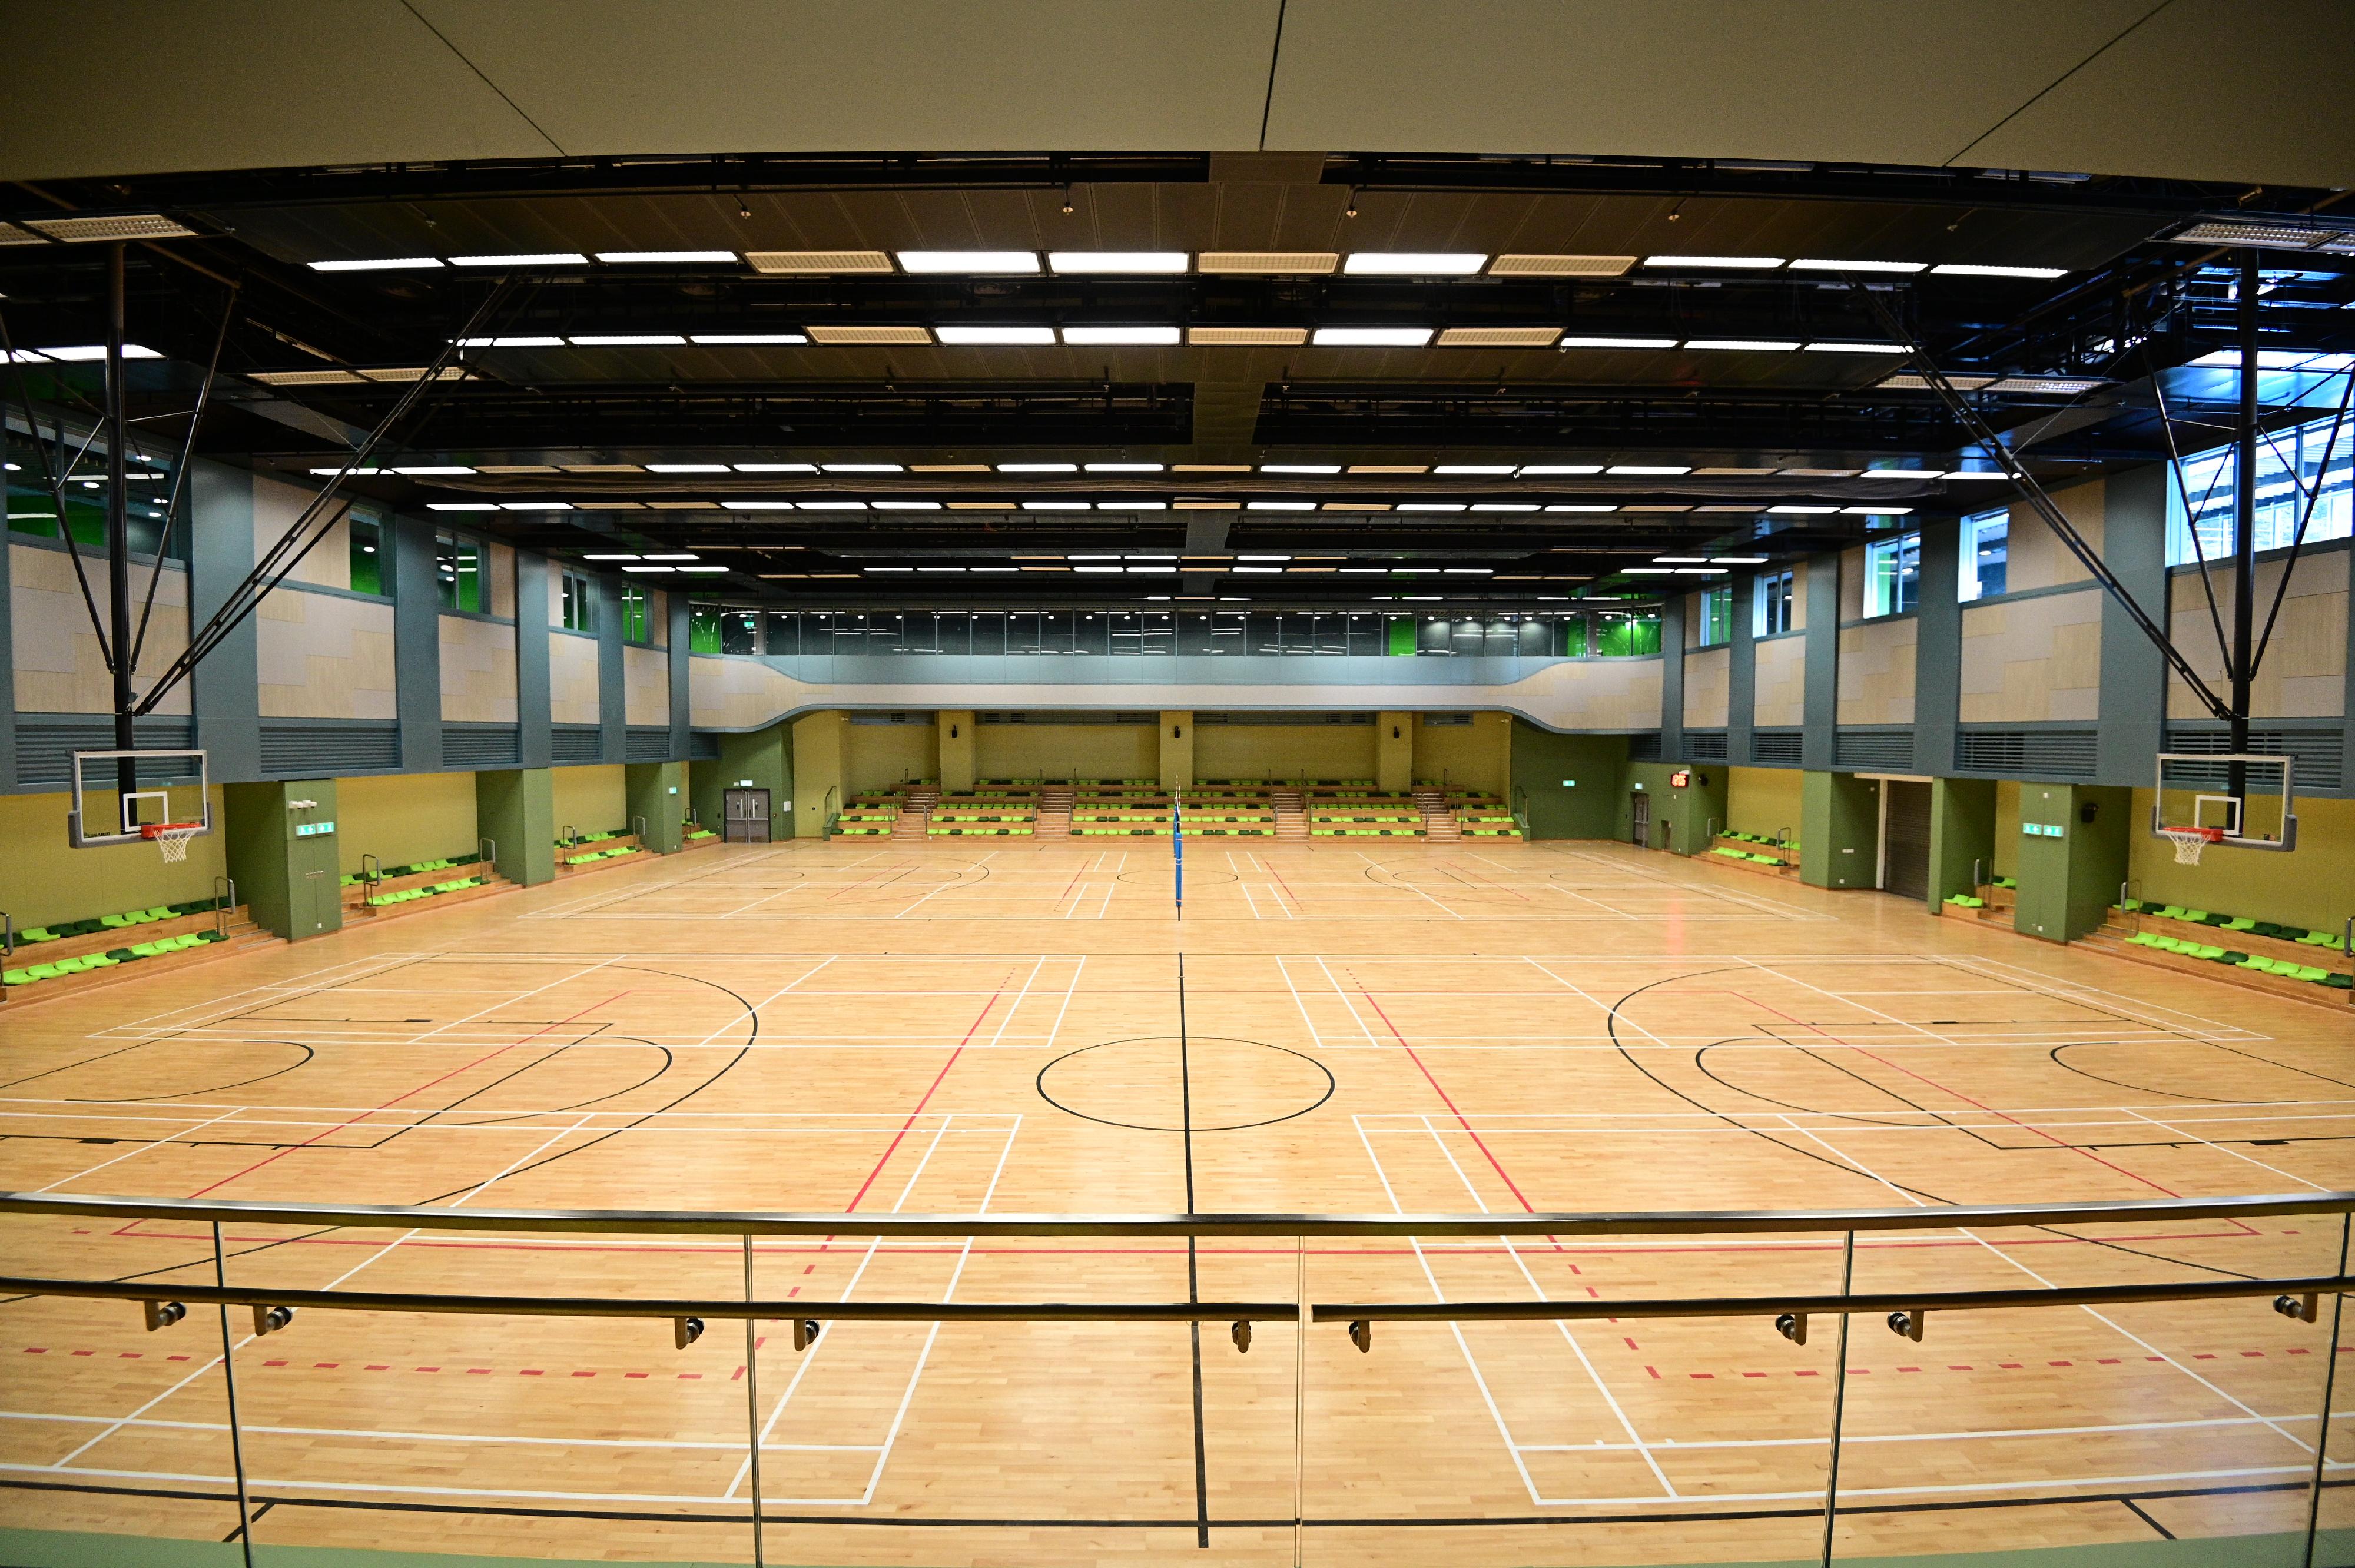 Choi Wing Road Sports Centre, managed by the Leisure and Cultural Services Department, will open for public use on December 29 (Wednesday). The new Choi Wing Road Sports Centre has a total area of about 9 380 square metres, providing a wide range of leisure and sports facilities. Photo shows the multi-purpose arena, which can serve as two basketball courts or two volleyball courts or eight badminton courts.